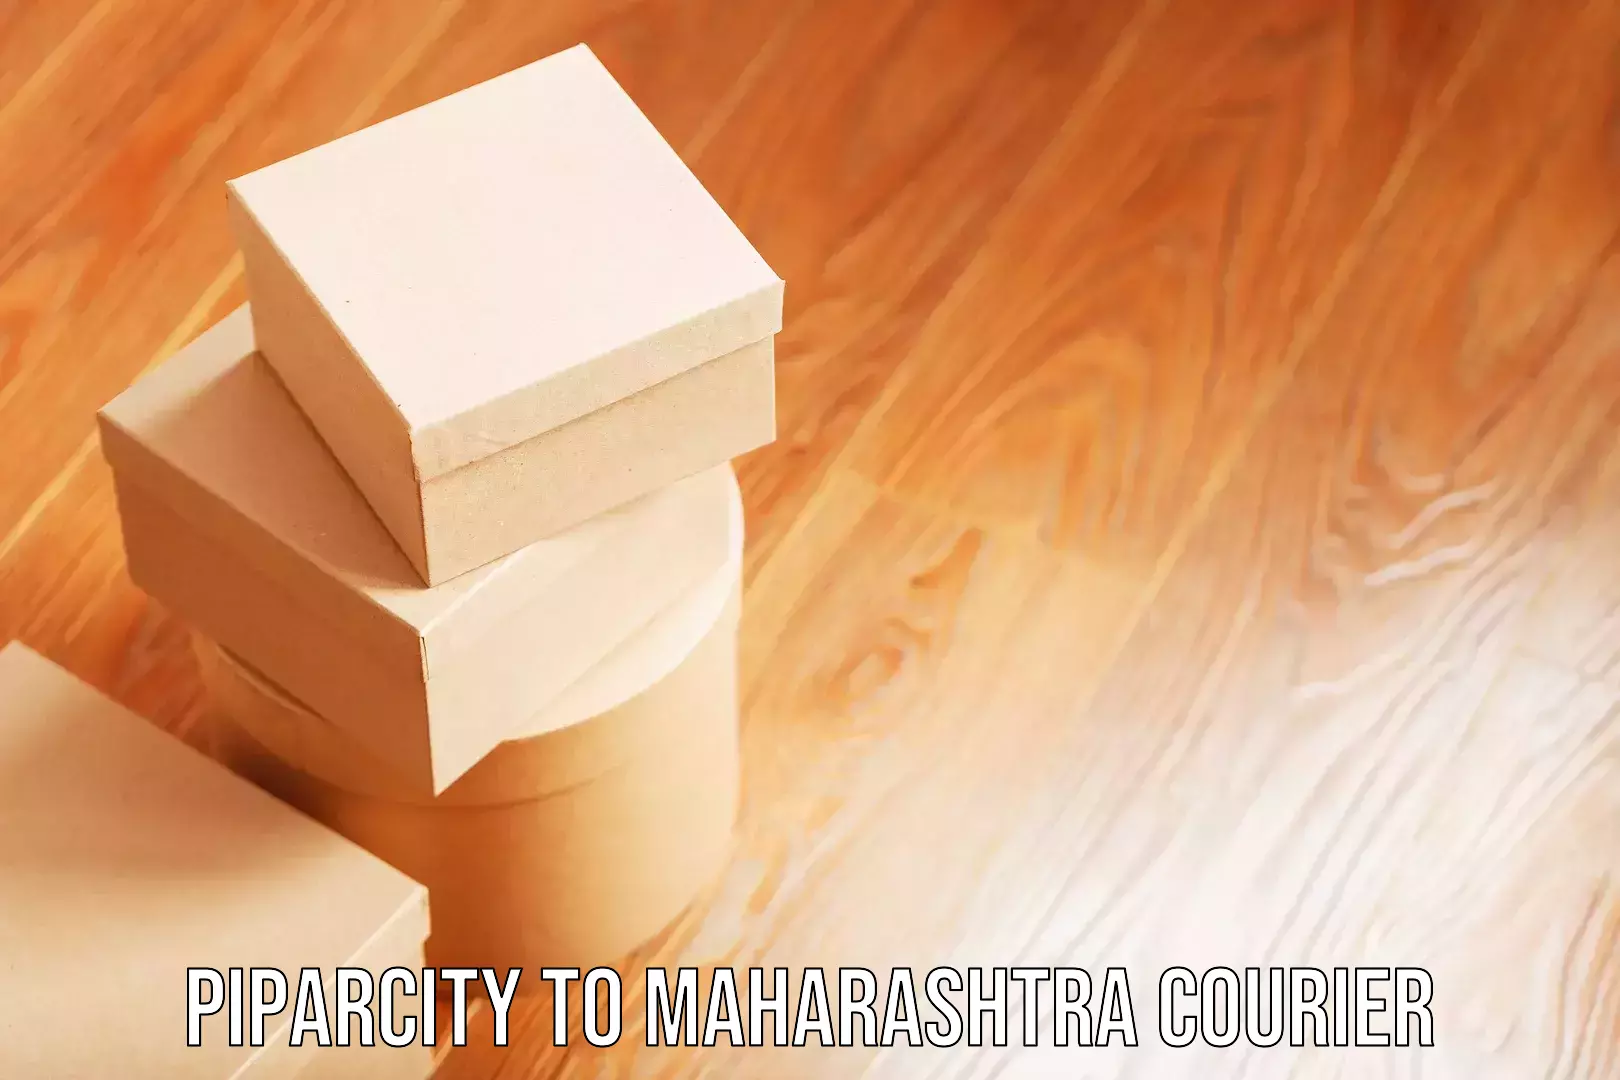 Trackable baggage shipping in Piparcity to Maharashtra